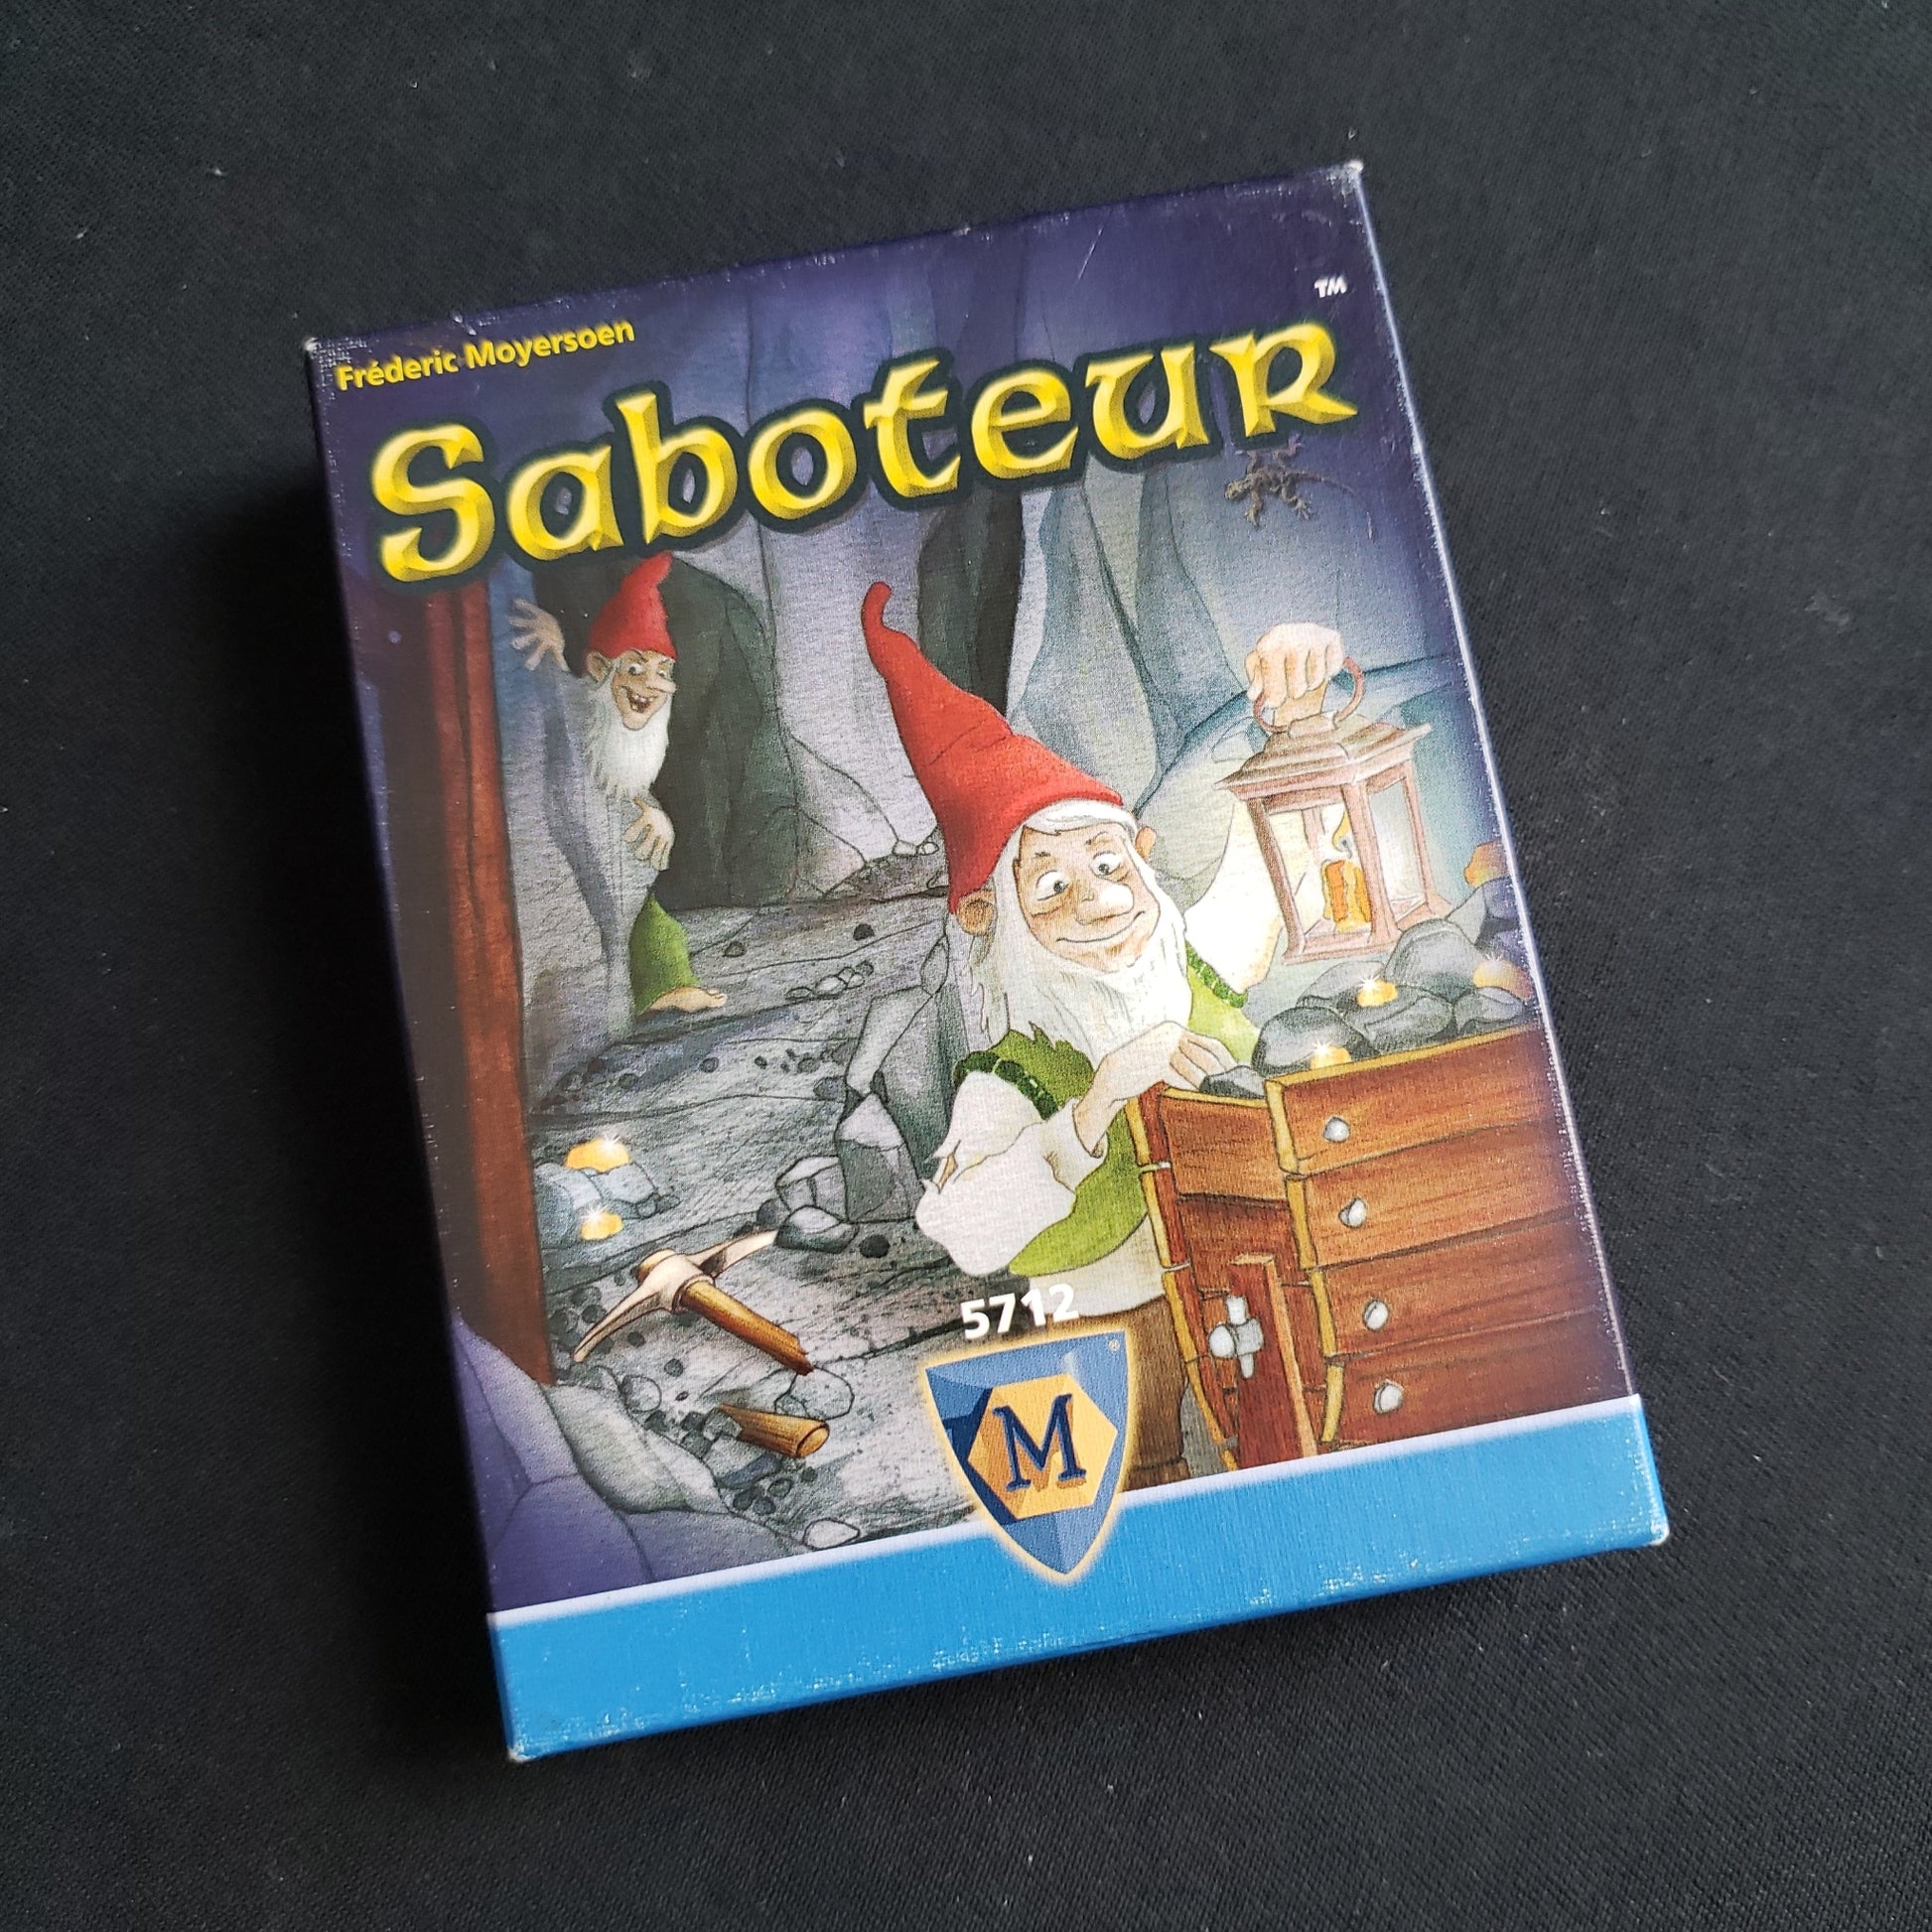 Saboteur – All Systems Go Games